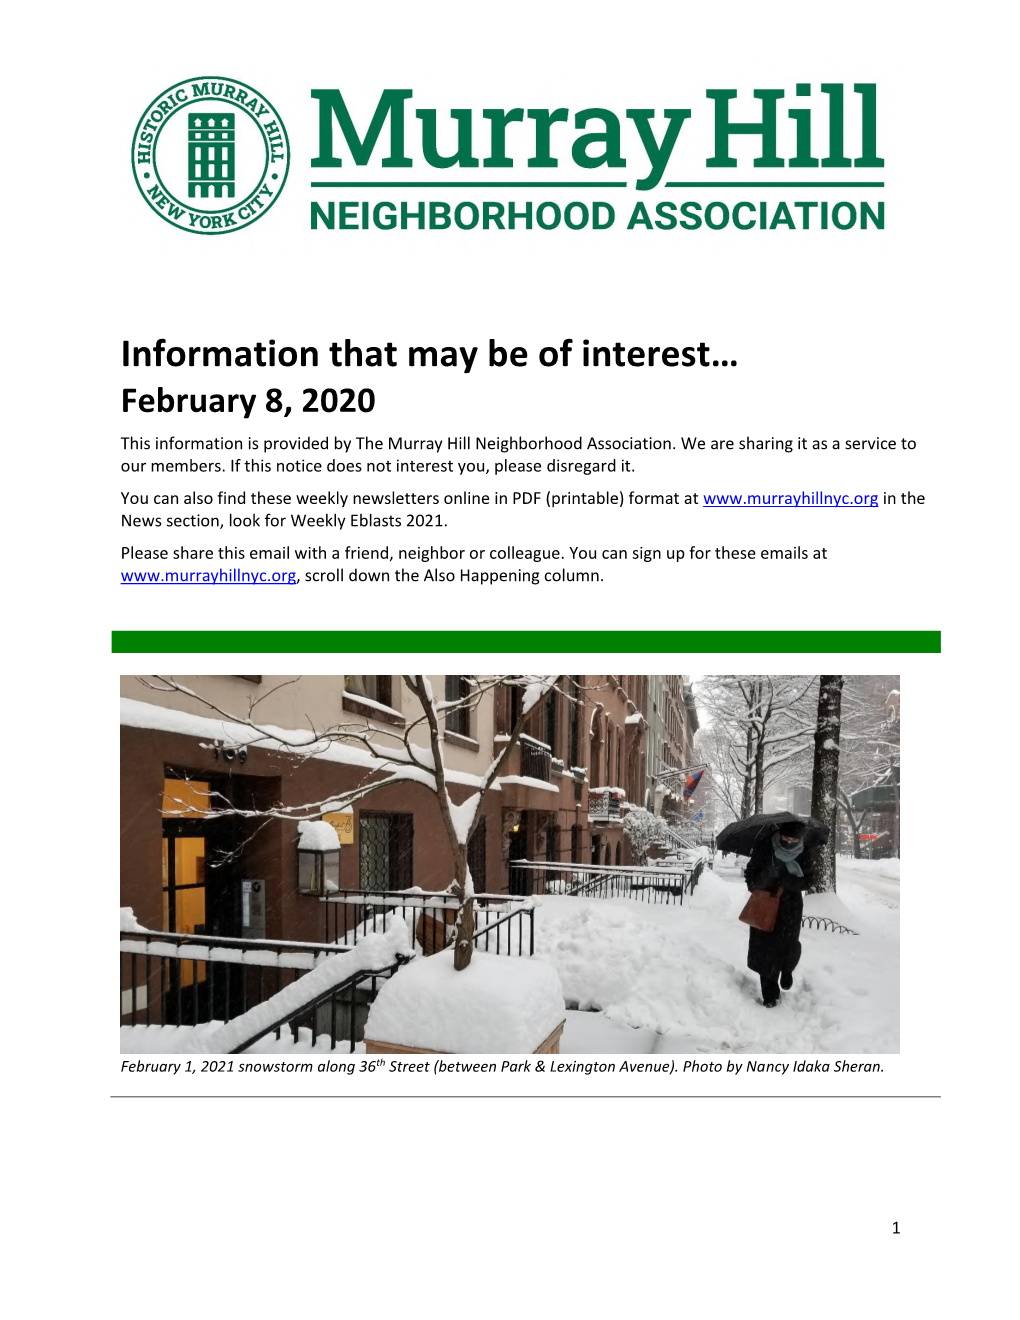 Information That May Be of Interest… February 8, 2020 This Information Is Provided by the Murray Hill Neighborhood Association